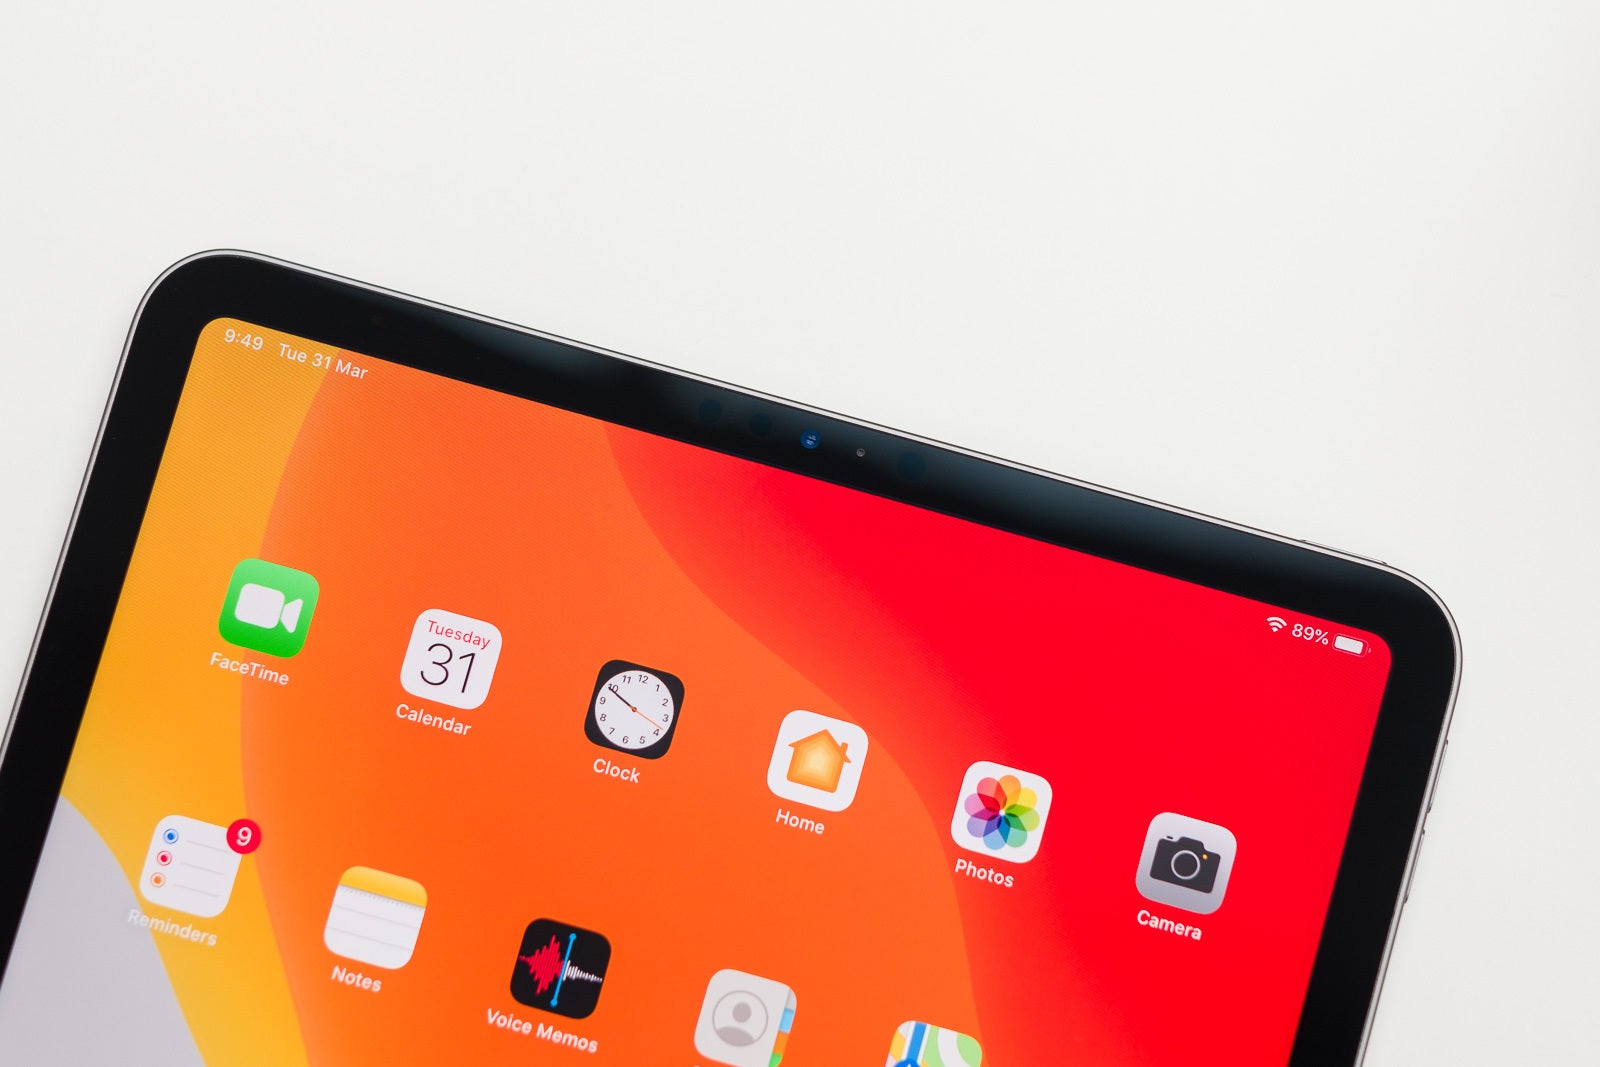 Apple to use mini-LED displays on up to 40% of iPads next year